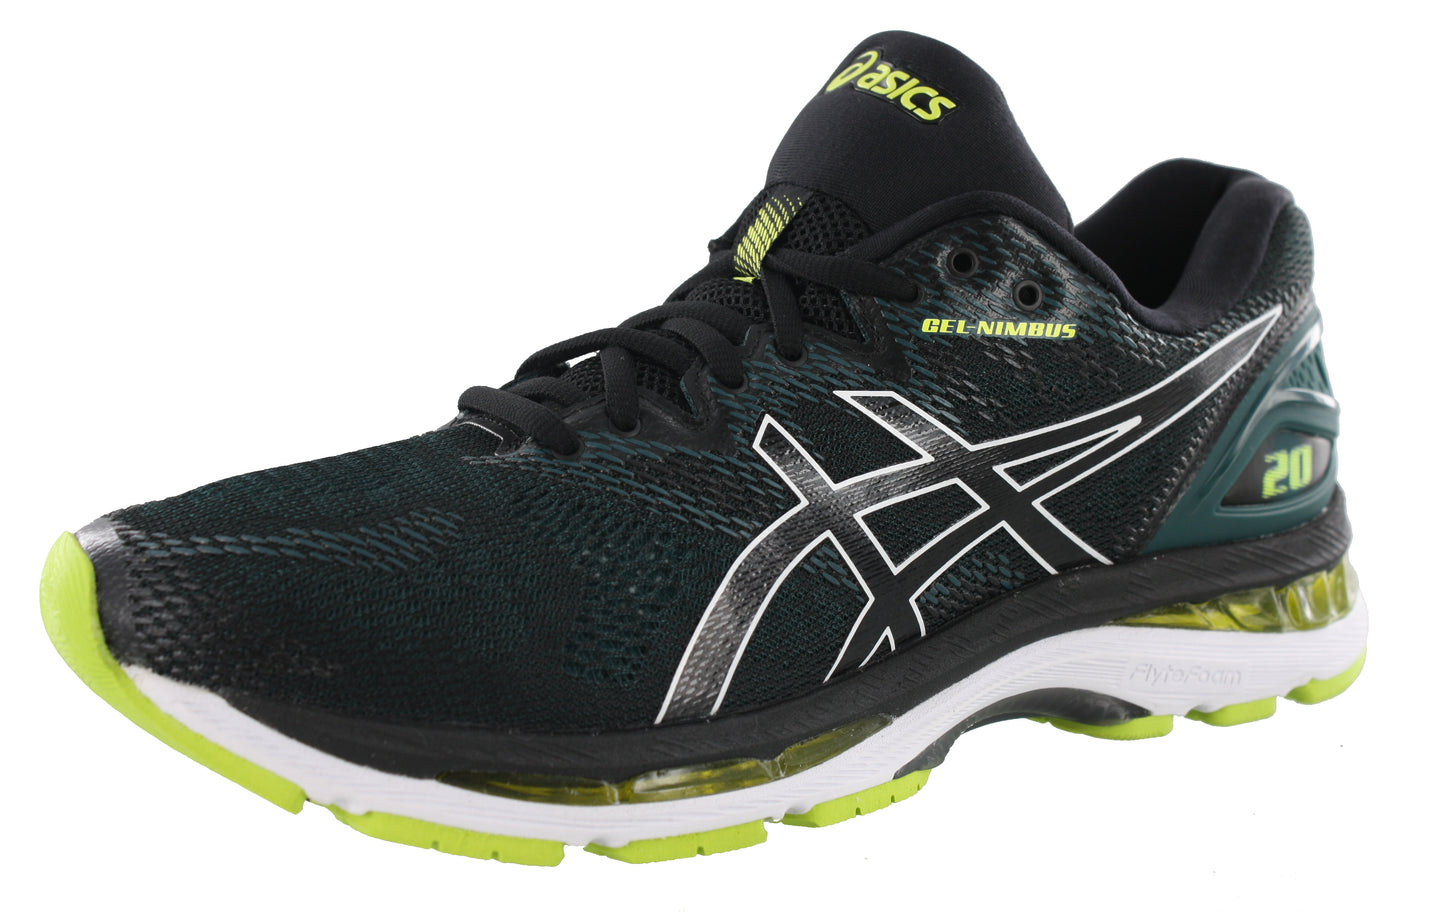 Lateral of Black with Neon Lime, Forest Green, and White accents ASICS Men Walking Trail Cushioned Running Shoes Gel Nimbus 20